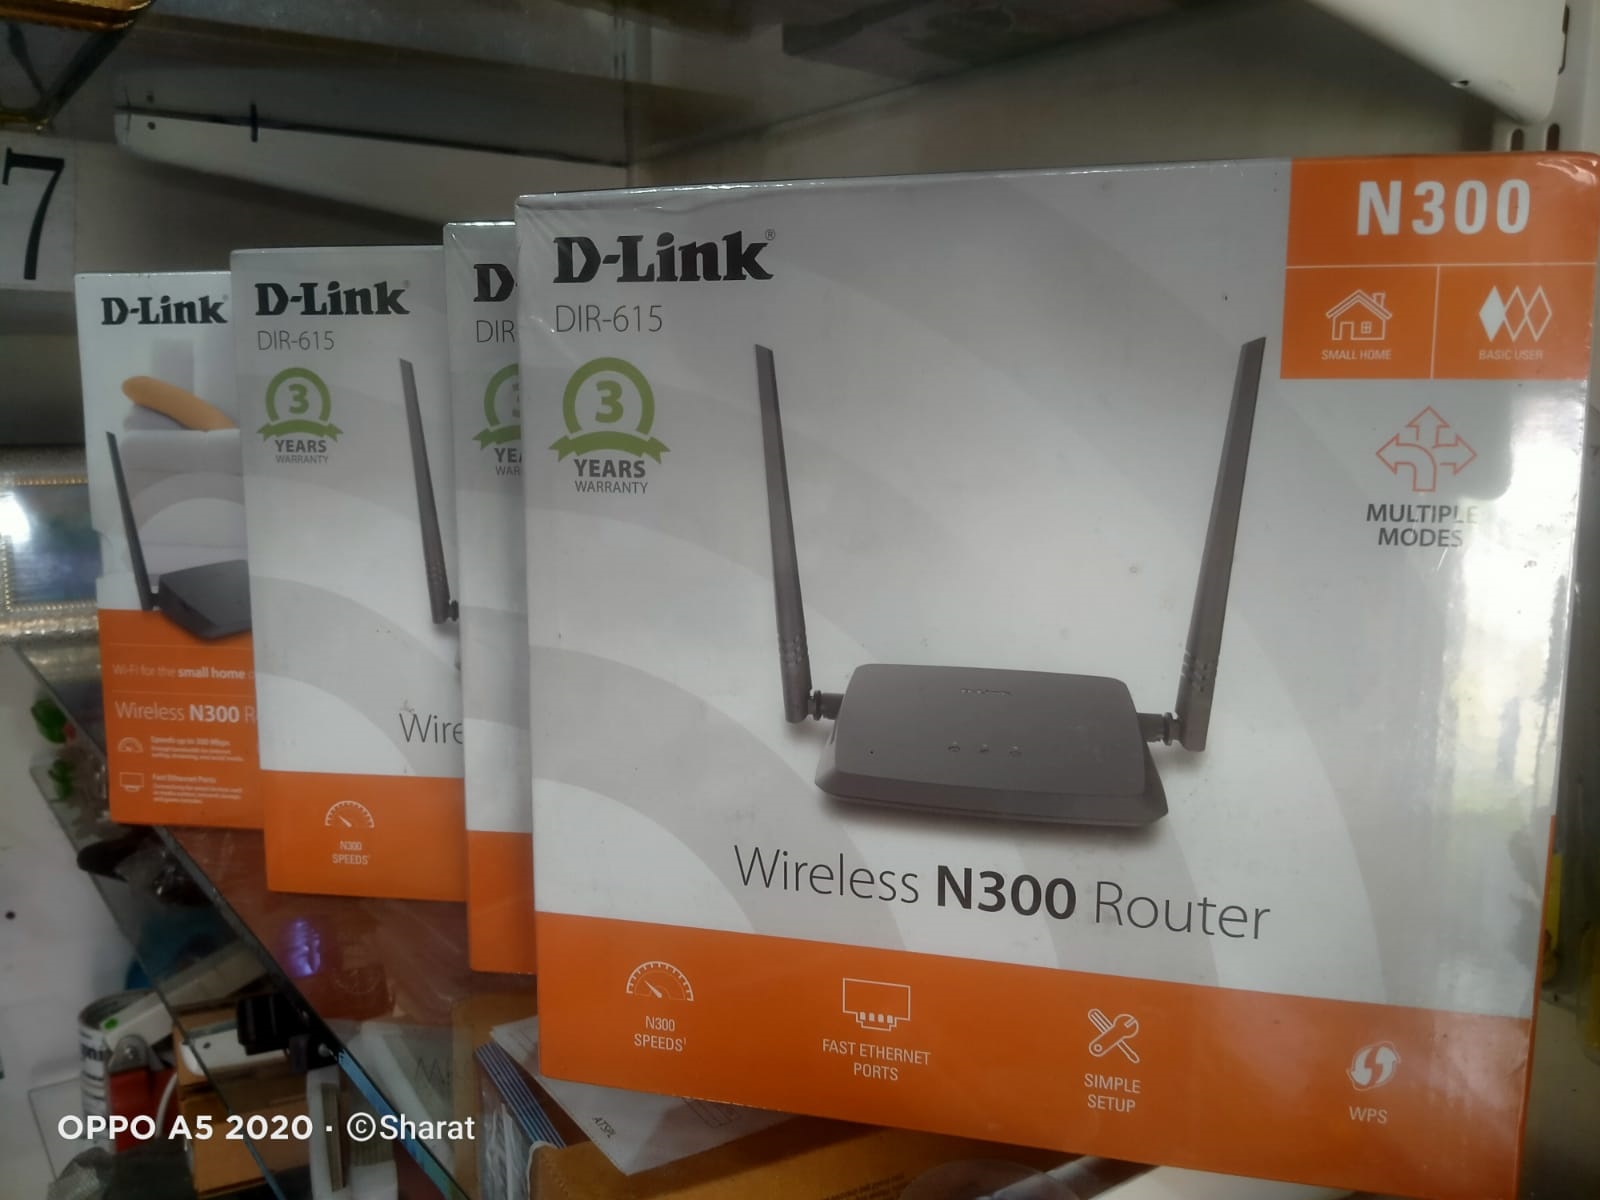 D-link Wi-Fi Routers